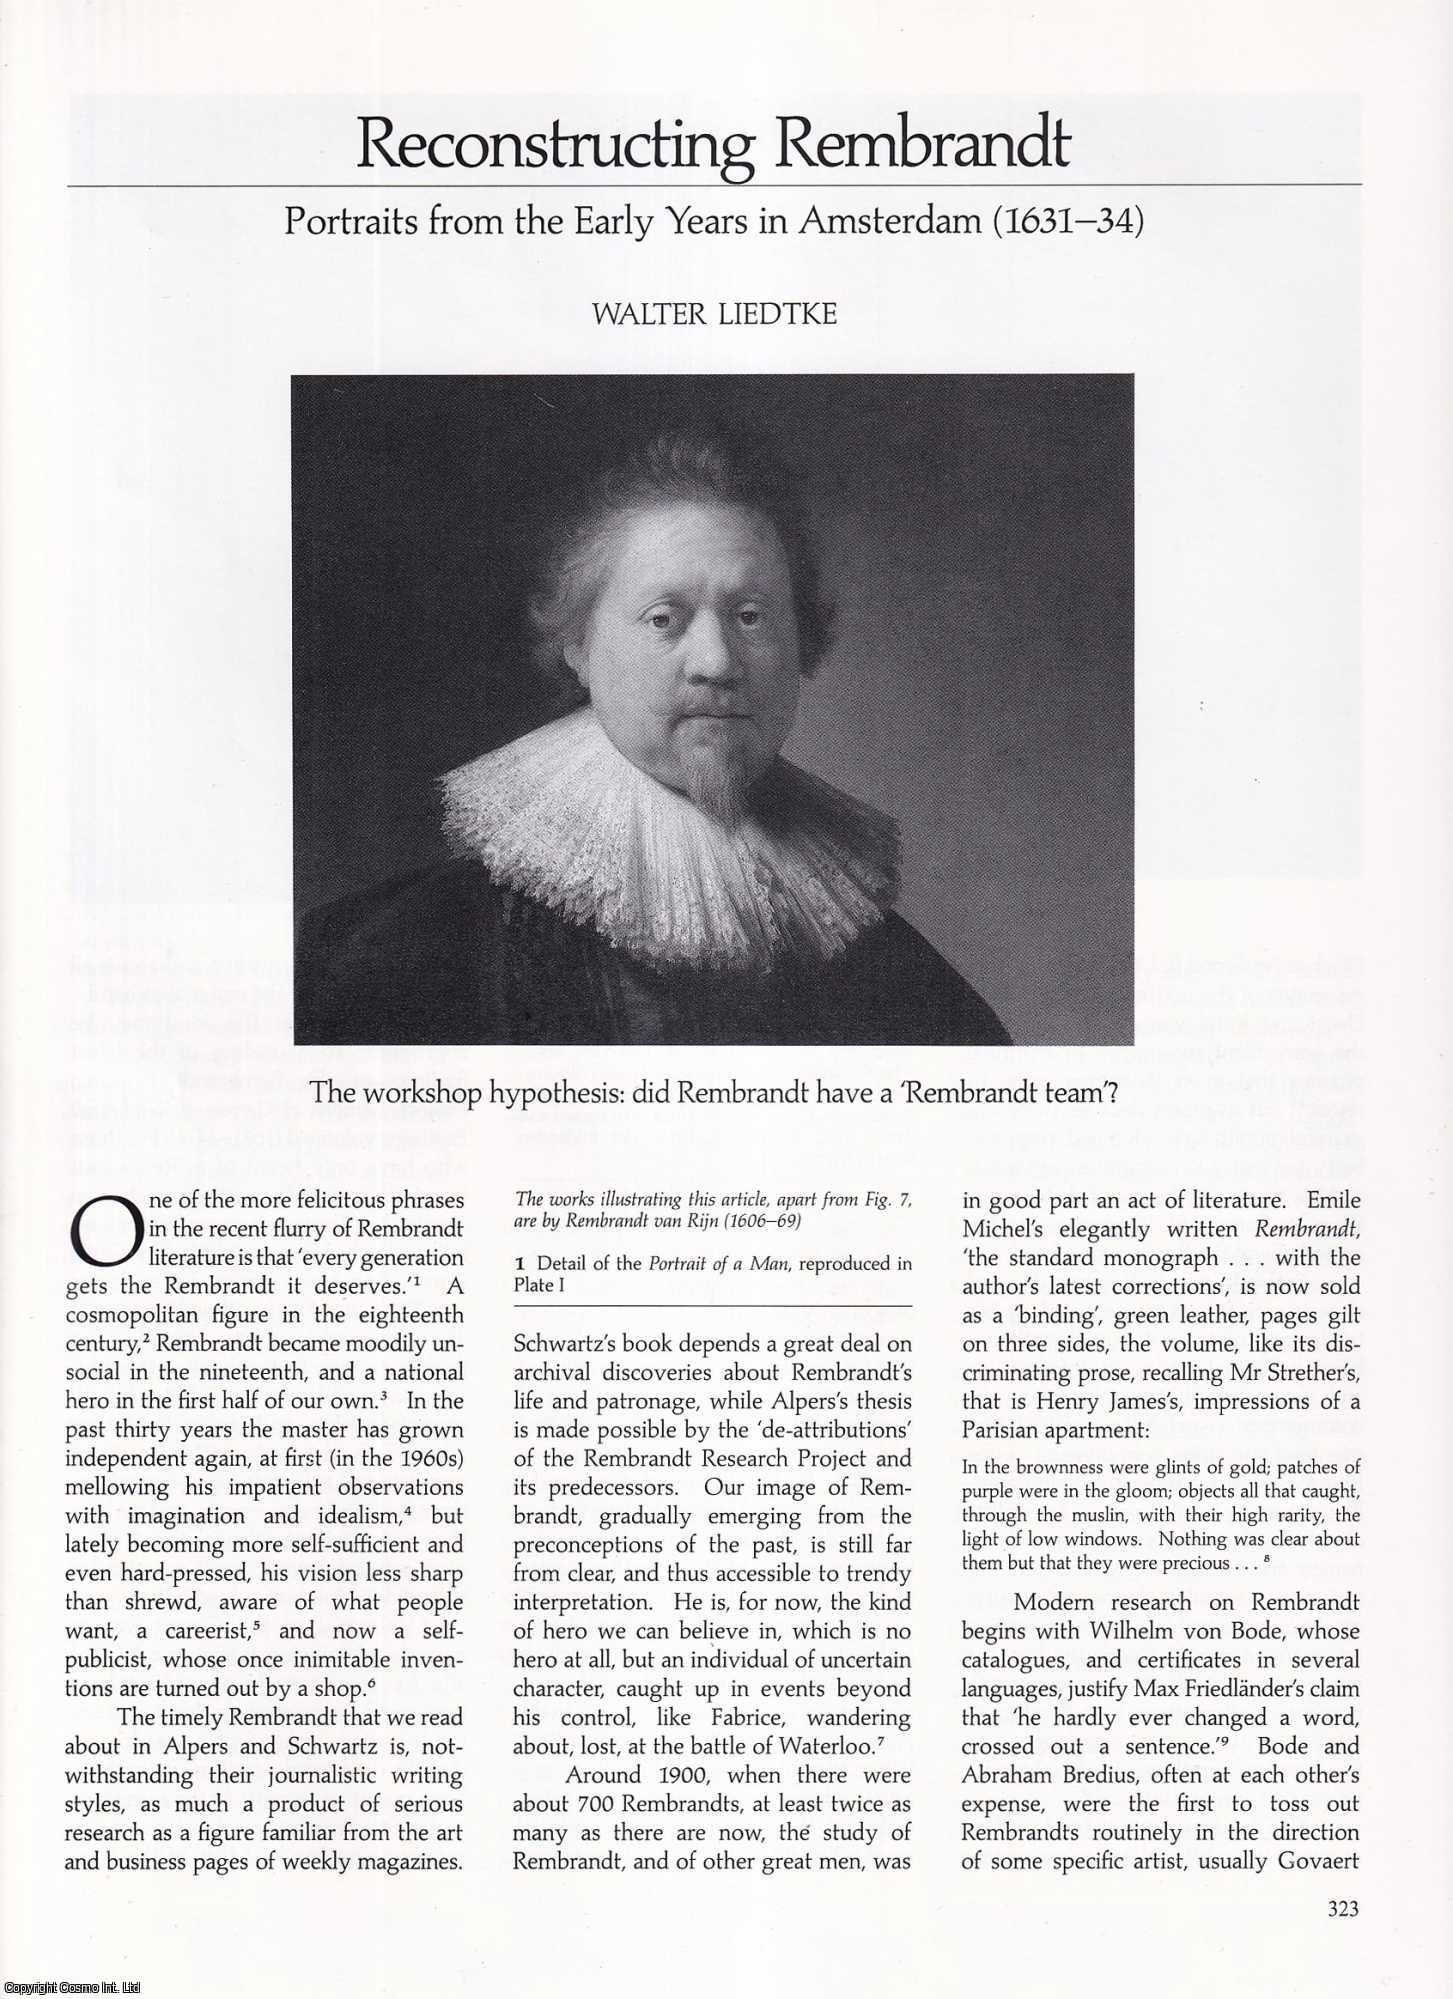 Walter Liedtke - Reconstructing Rembrandt: Portraits from the Early Years in Amsterdam (1631-34). An original article from Apollo, International Magazine of the Arts, 1989.